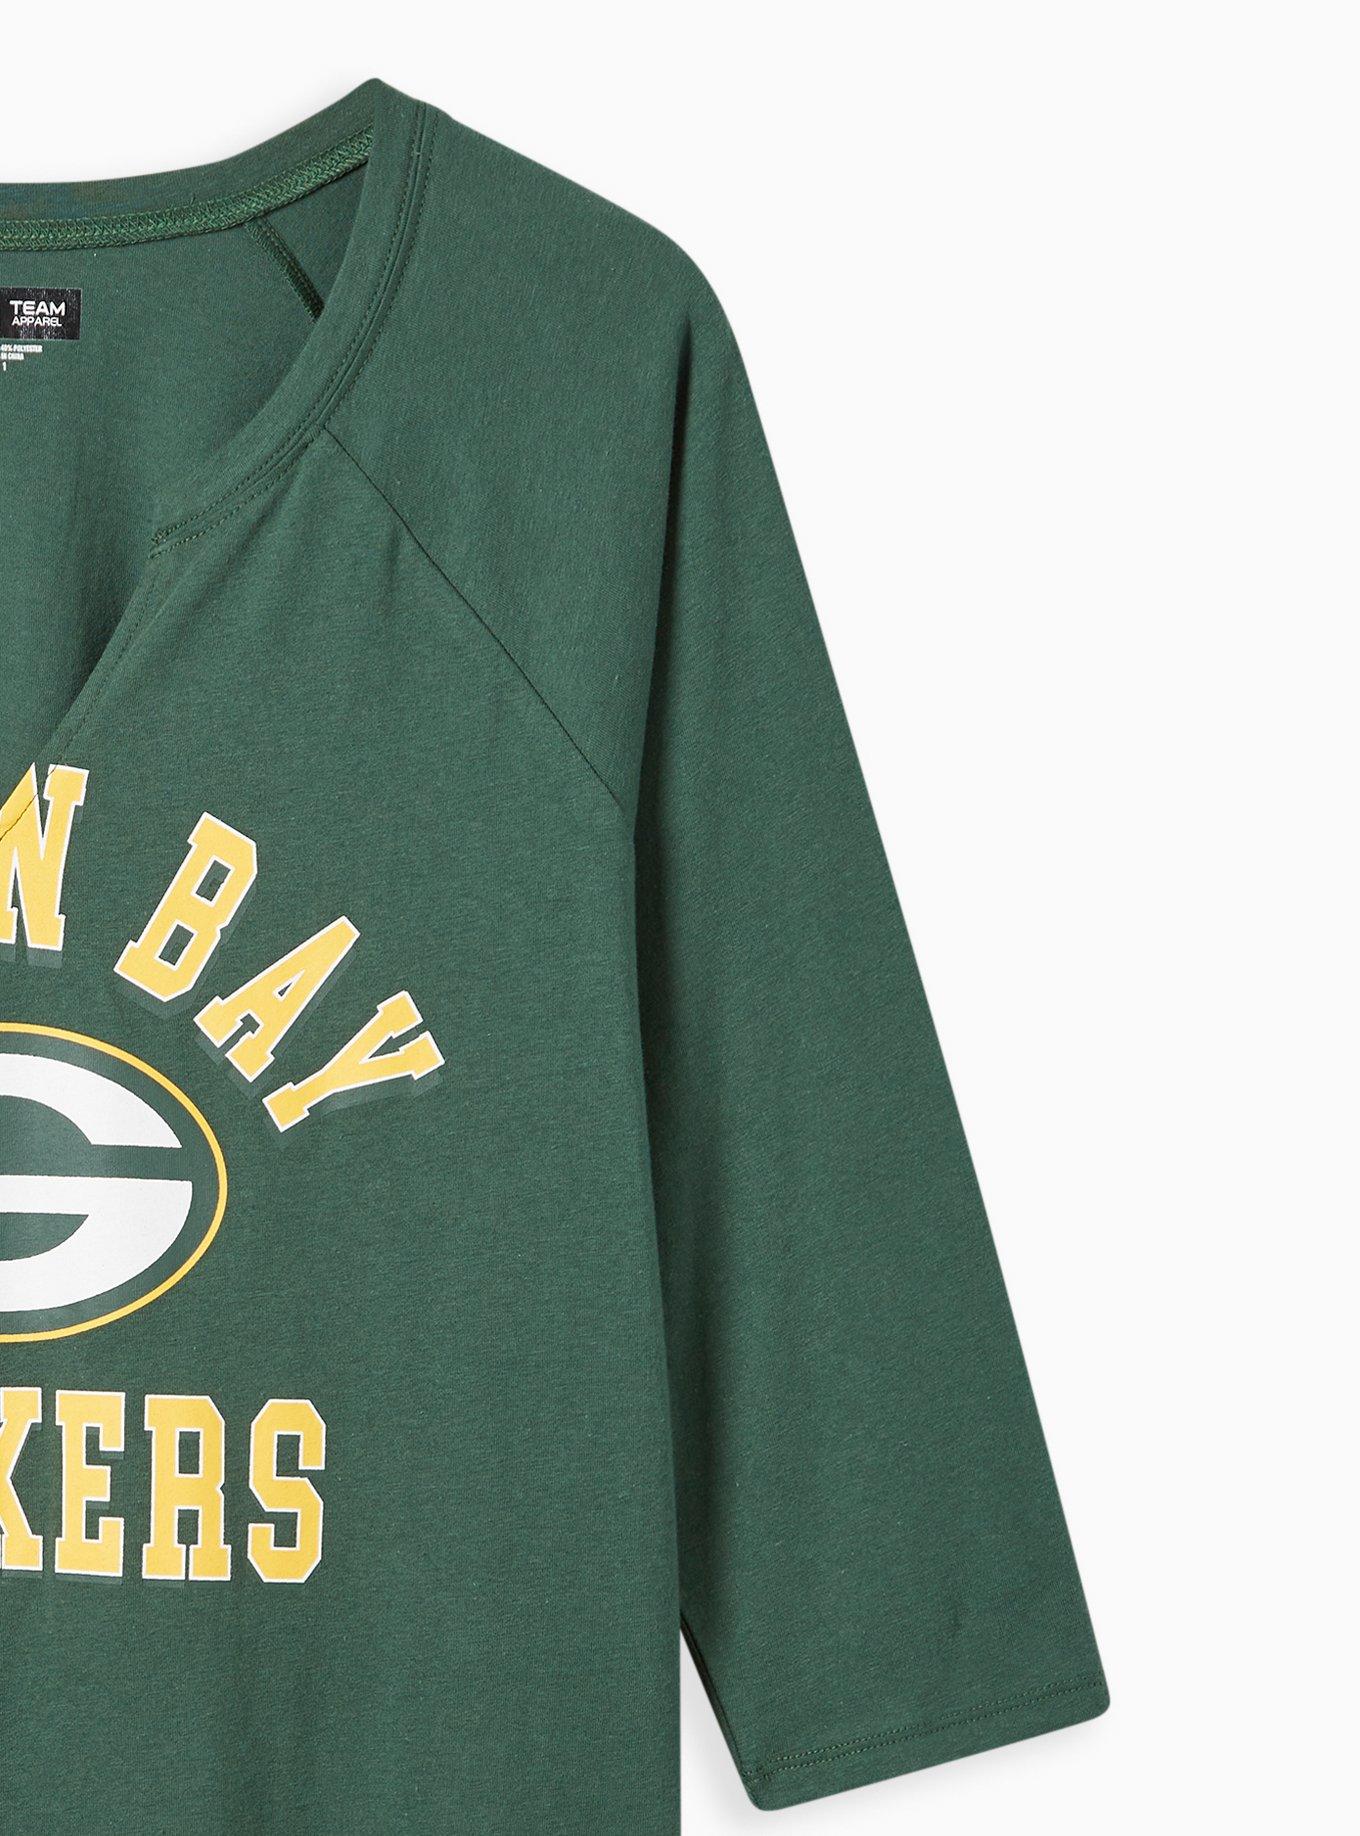 Green Bay Packers Plus Sizes Apparel, Packers Plus Sizes Clothing